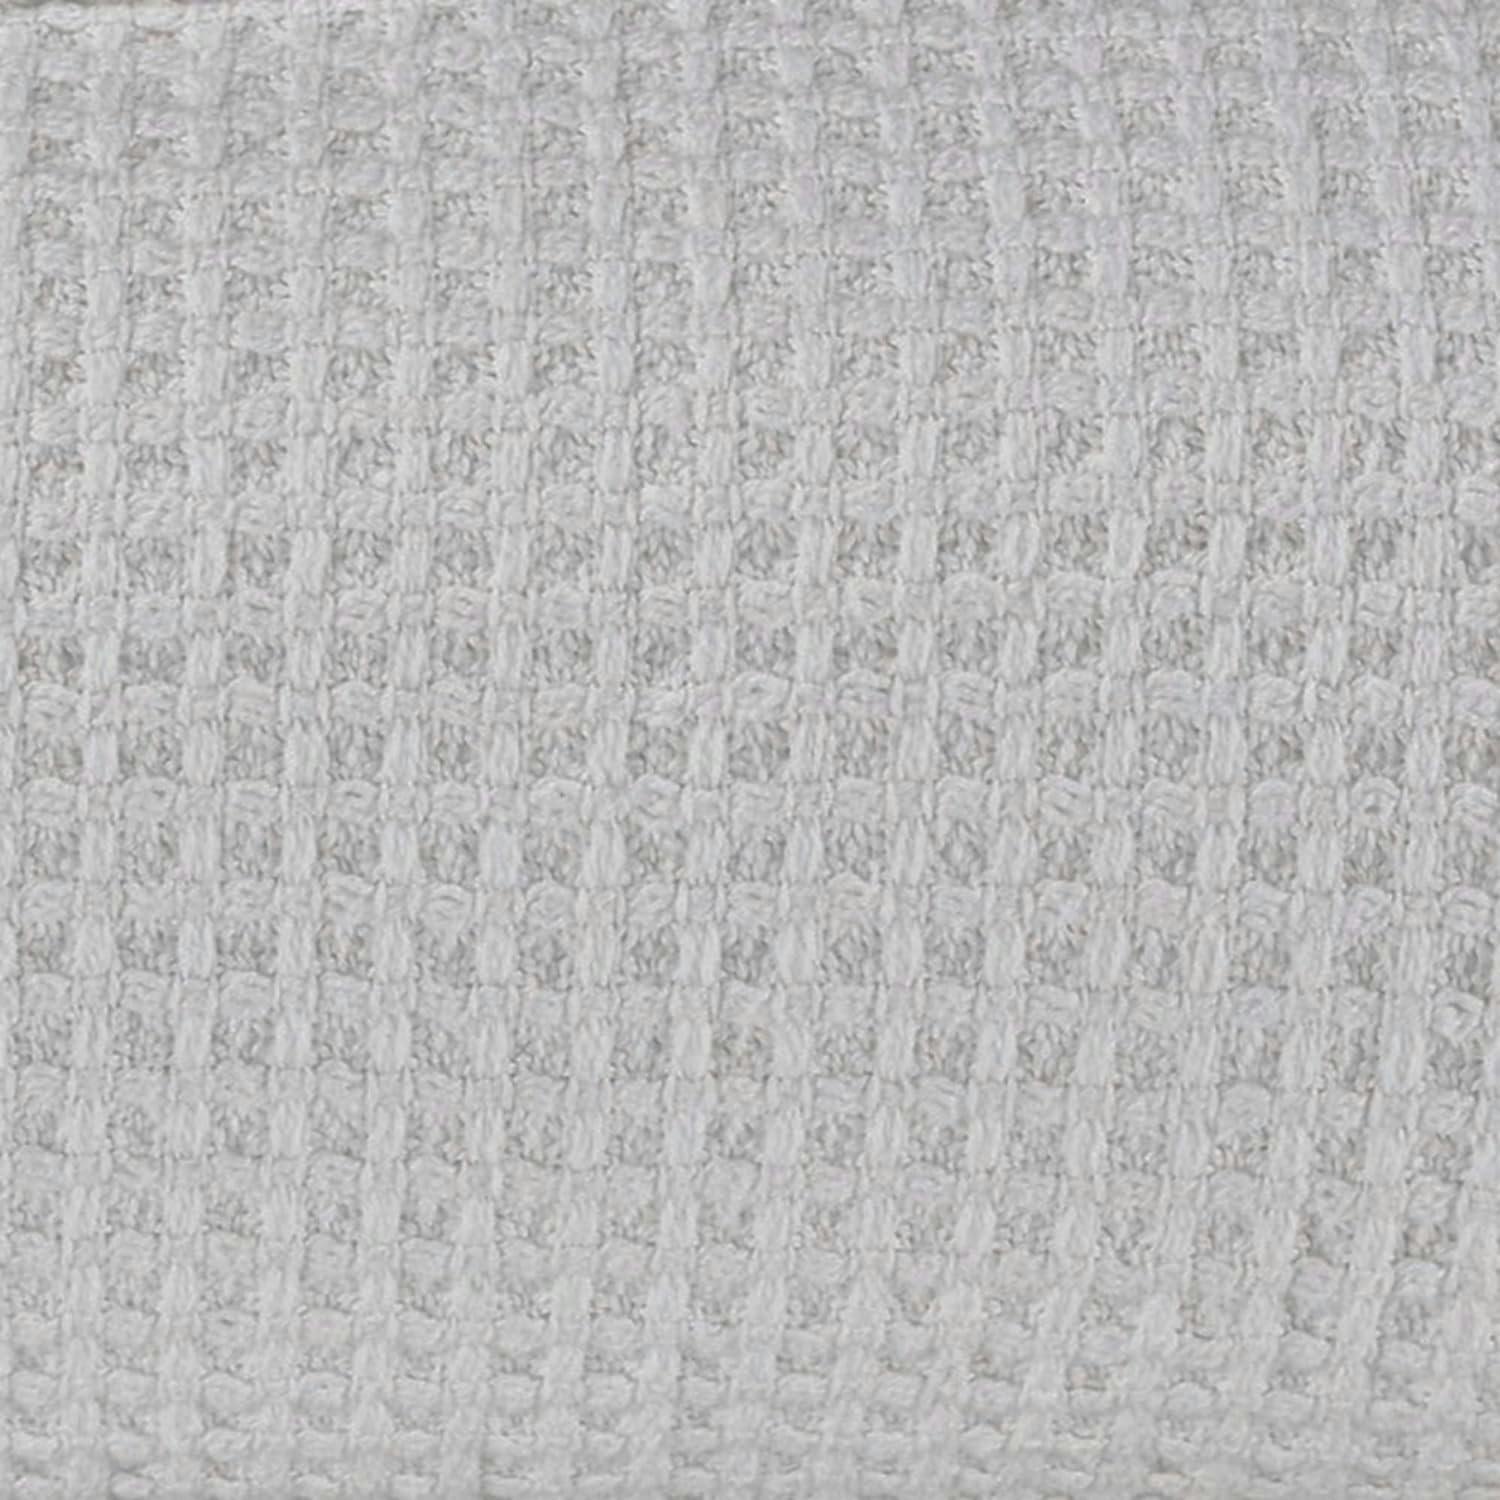 Waffleweave Soft Grey Cotton Twin Blanket with Reversible Knit